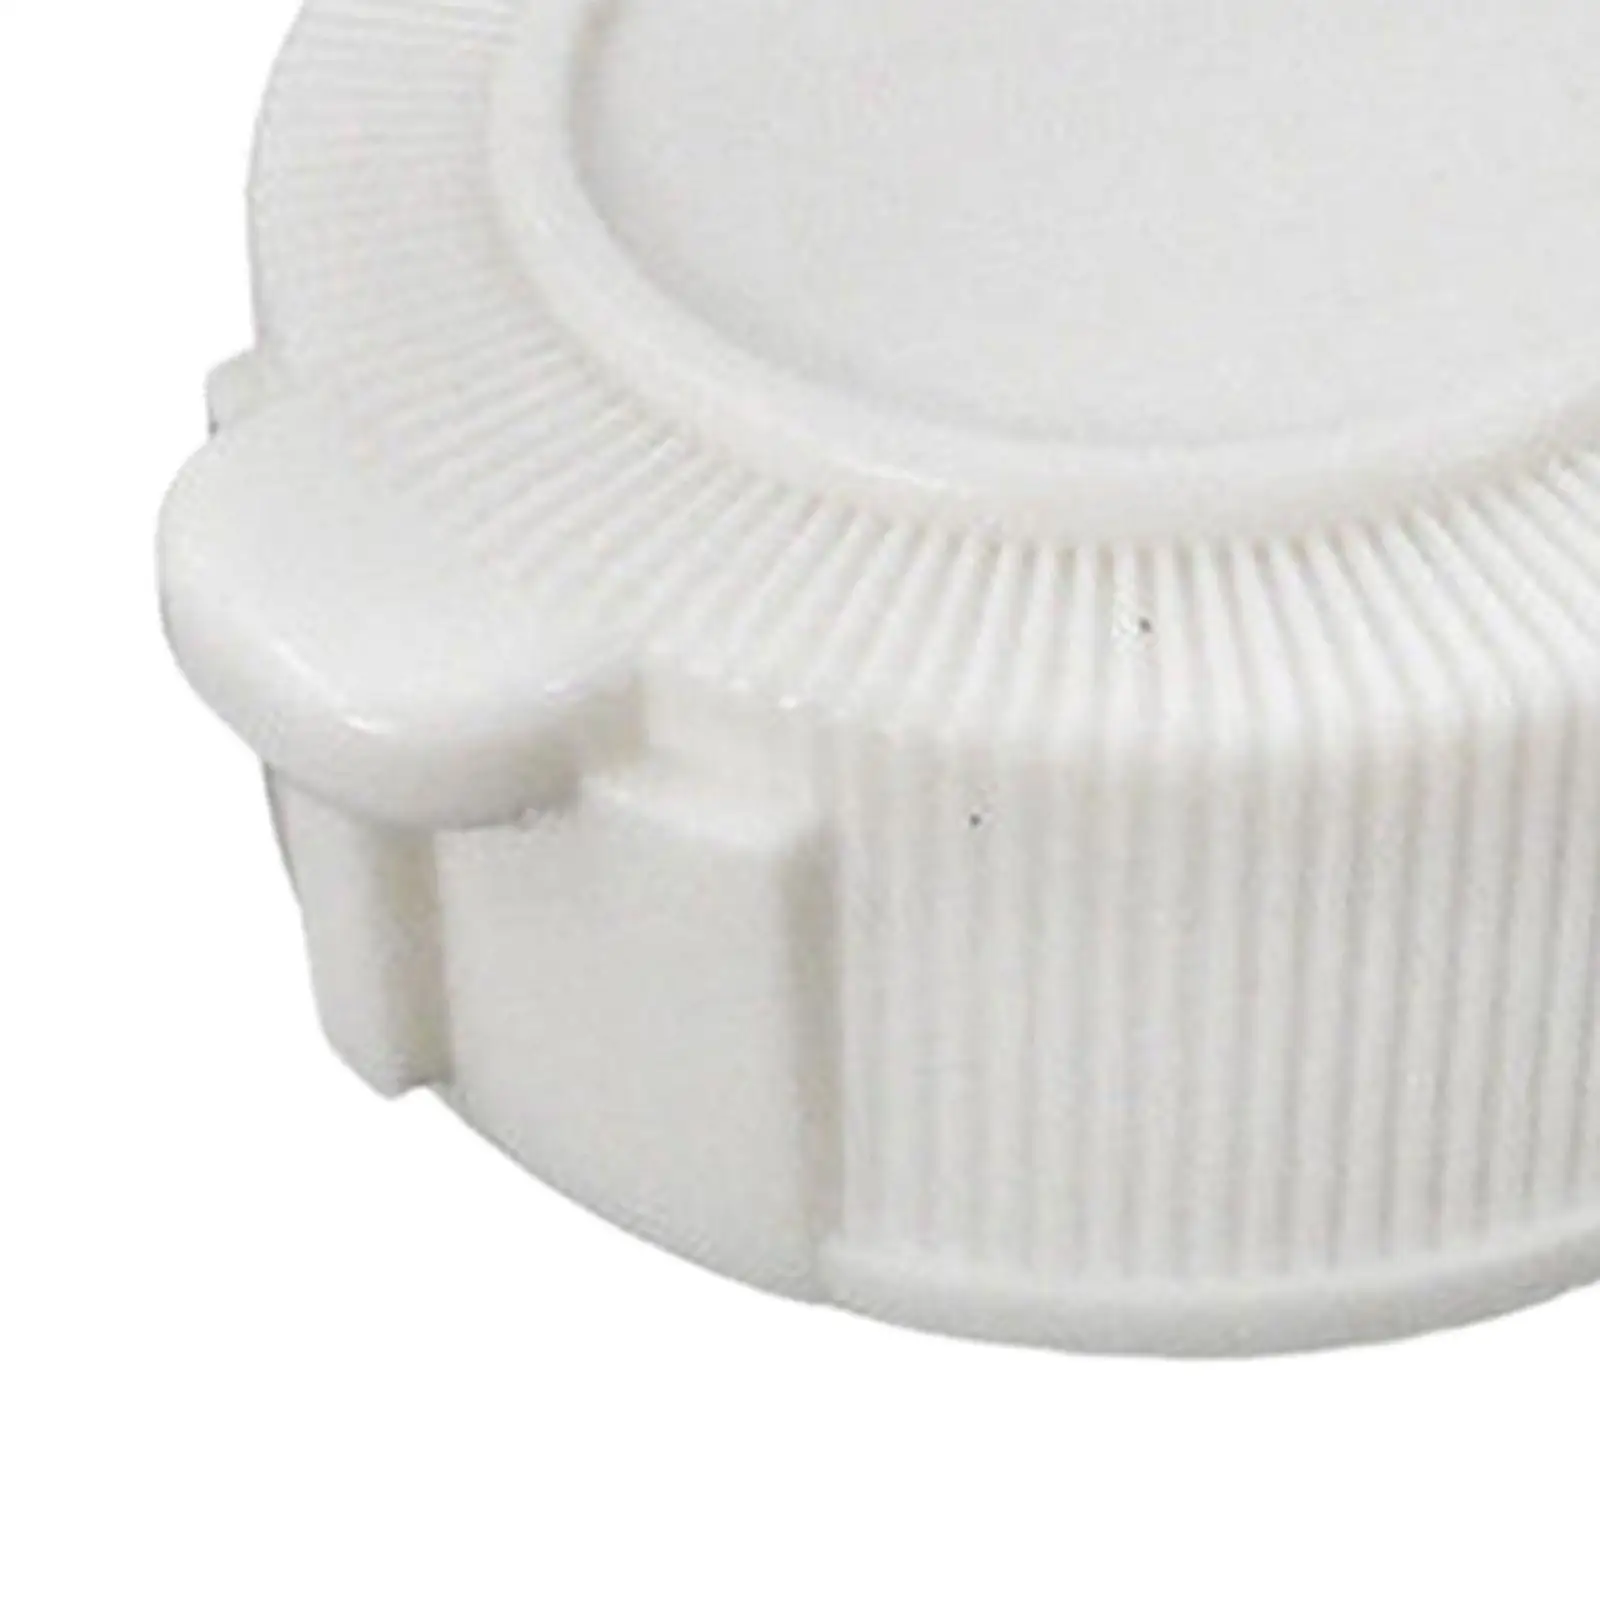 Pools Valve Cap and Plug Drainage Plug Accessories Easy to Install Spare Parts Durable Drain Plug Cap for Pools Air Mattress